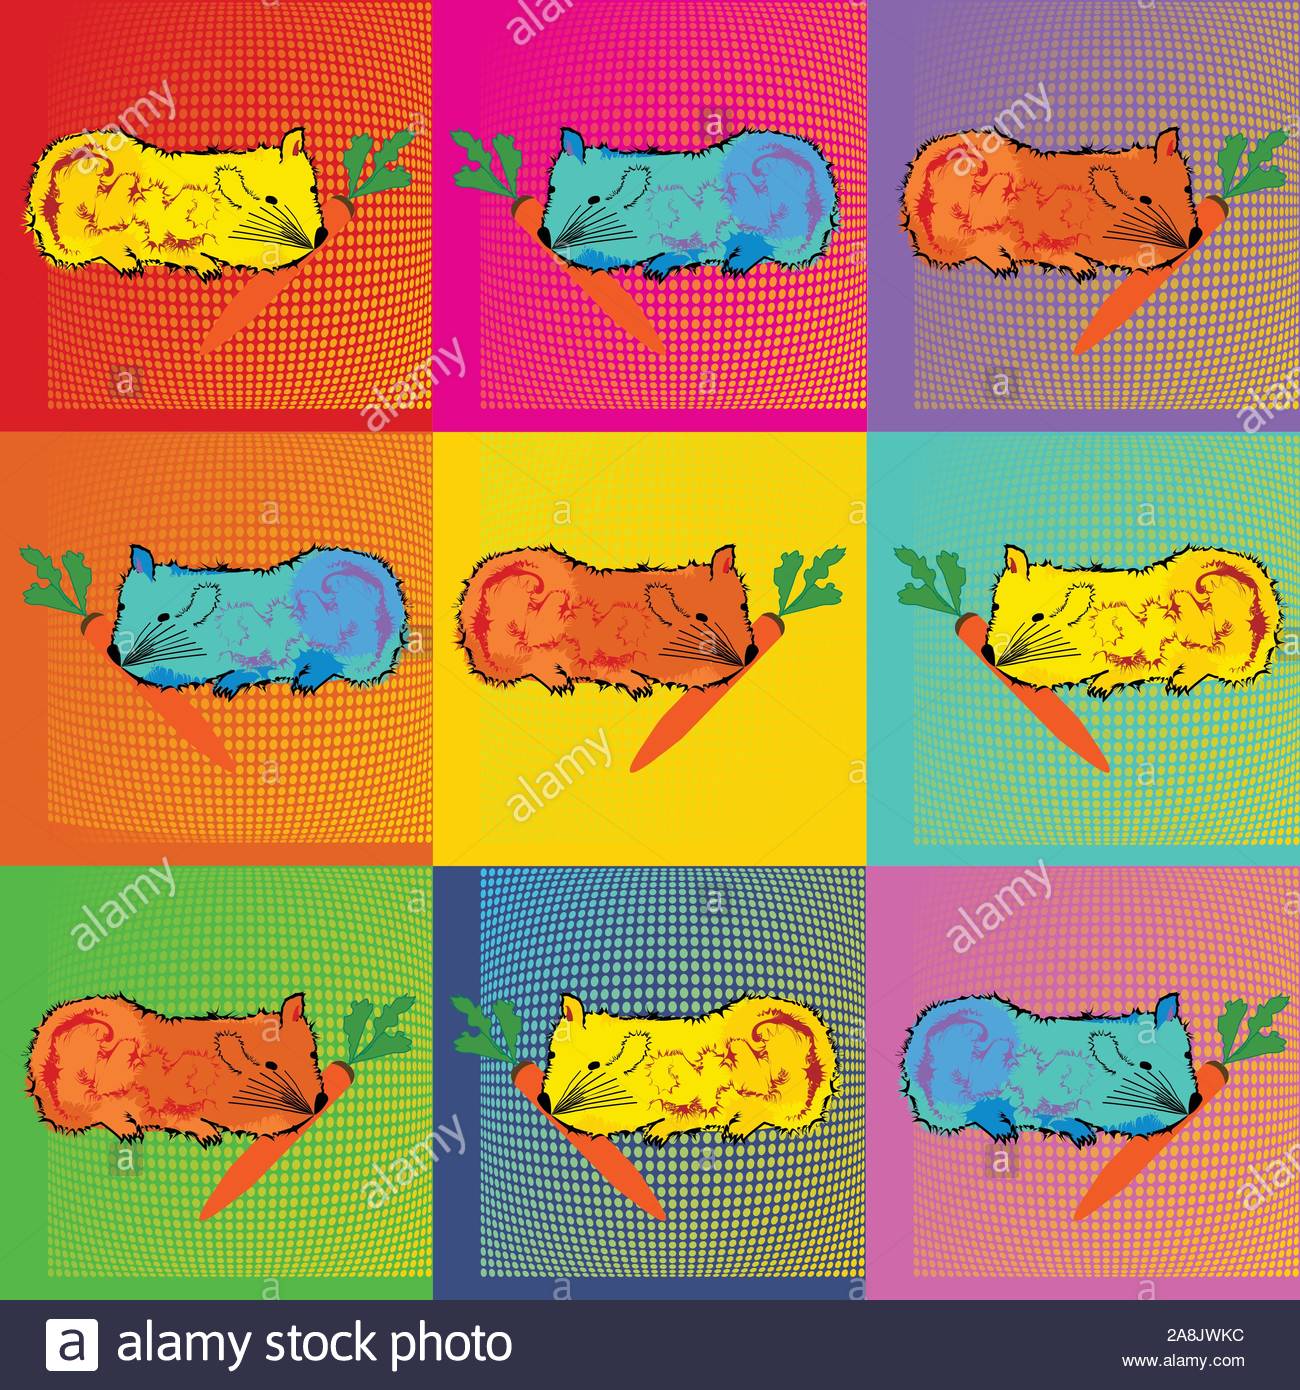 Pop Art Andy Warhol Background Illustration With Colorful Hamster